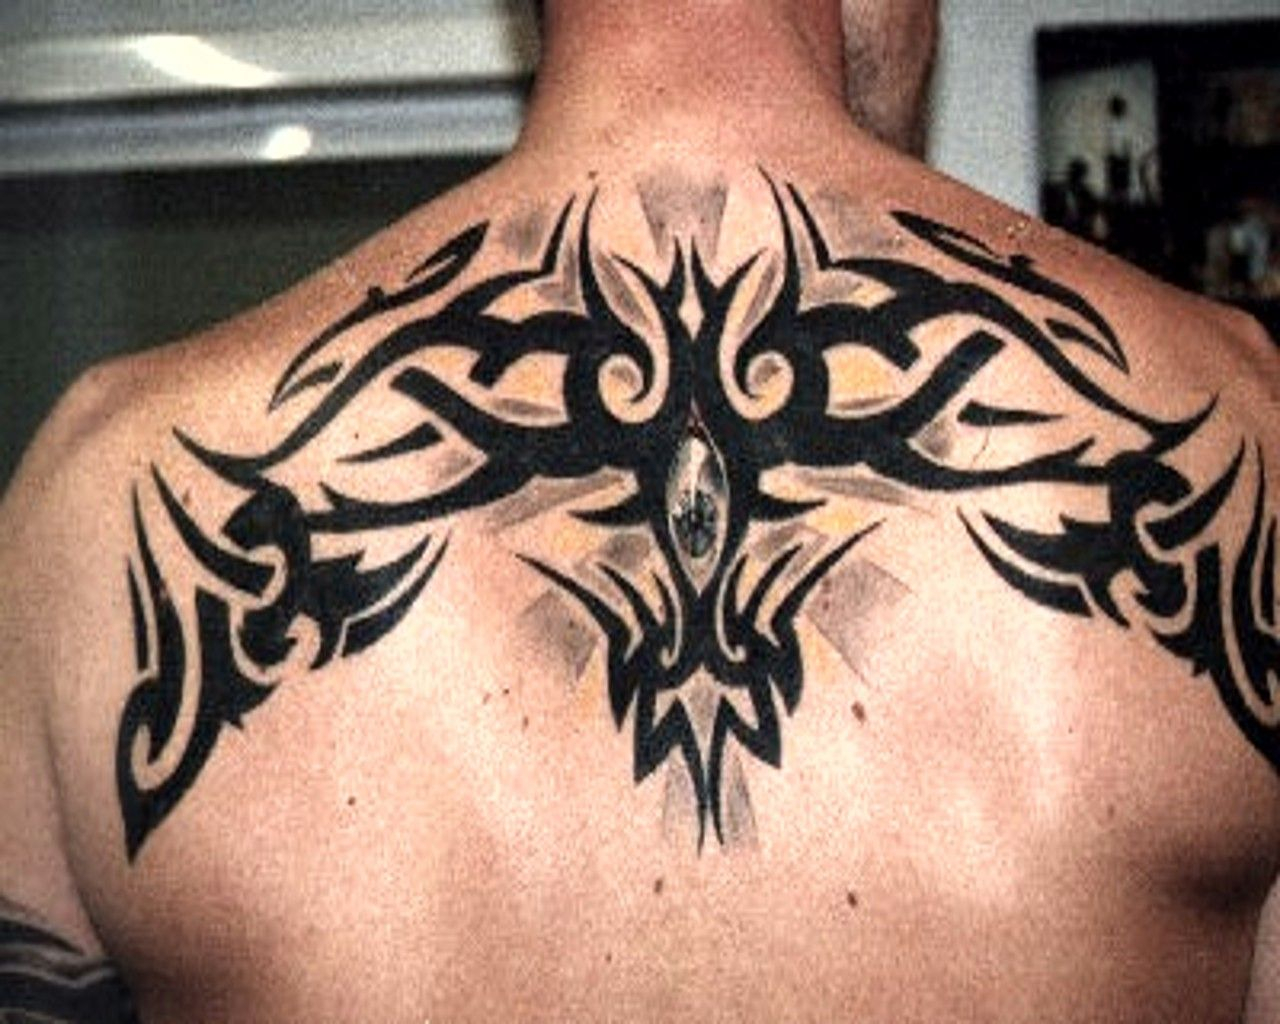 Upper Back Celtic Design Tattoos Tribal Back Tattoos Tribal within dimensions 1280 X 1024